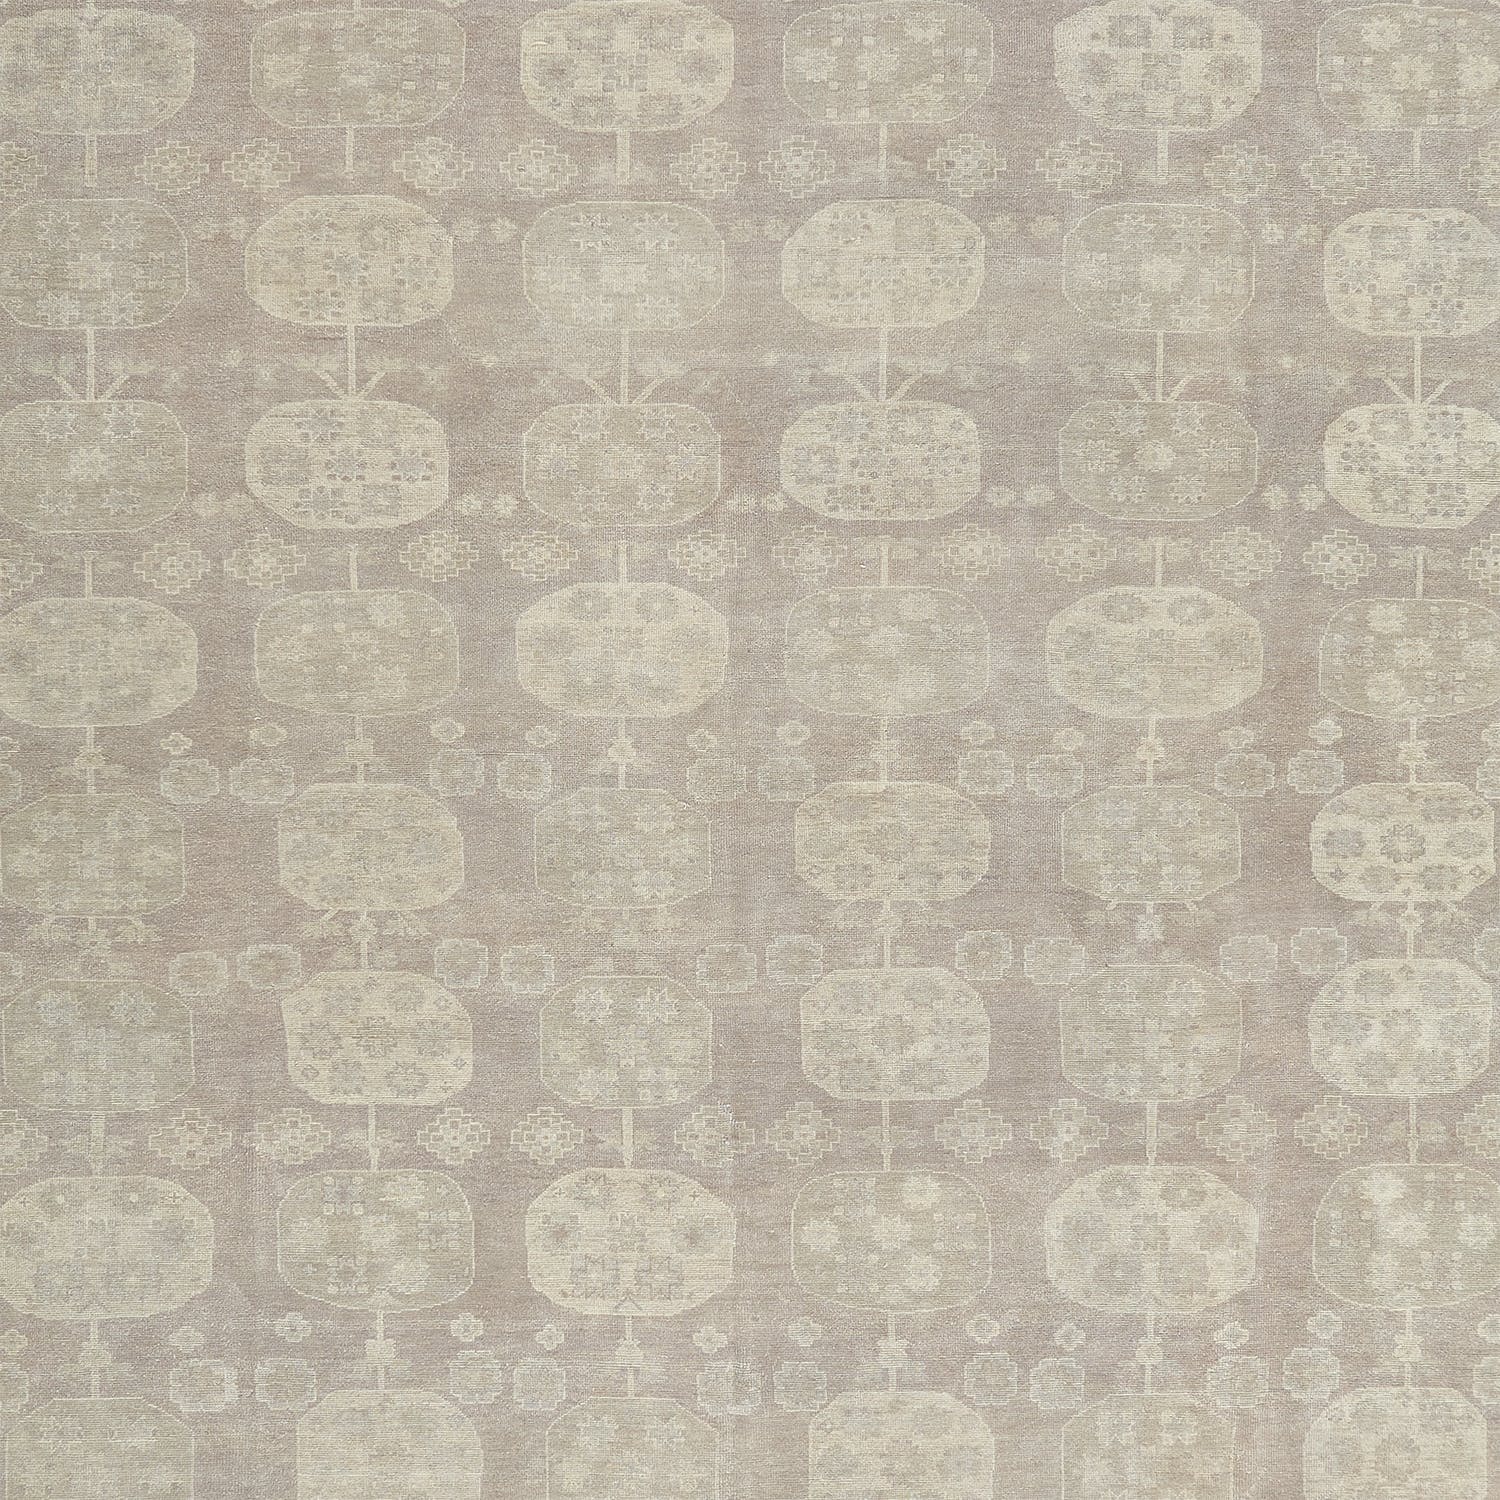 Patterned fabric with repeating circular medallions in muted vintage style.